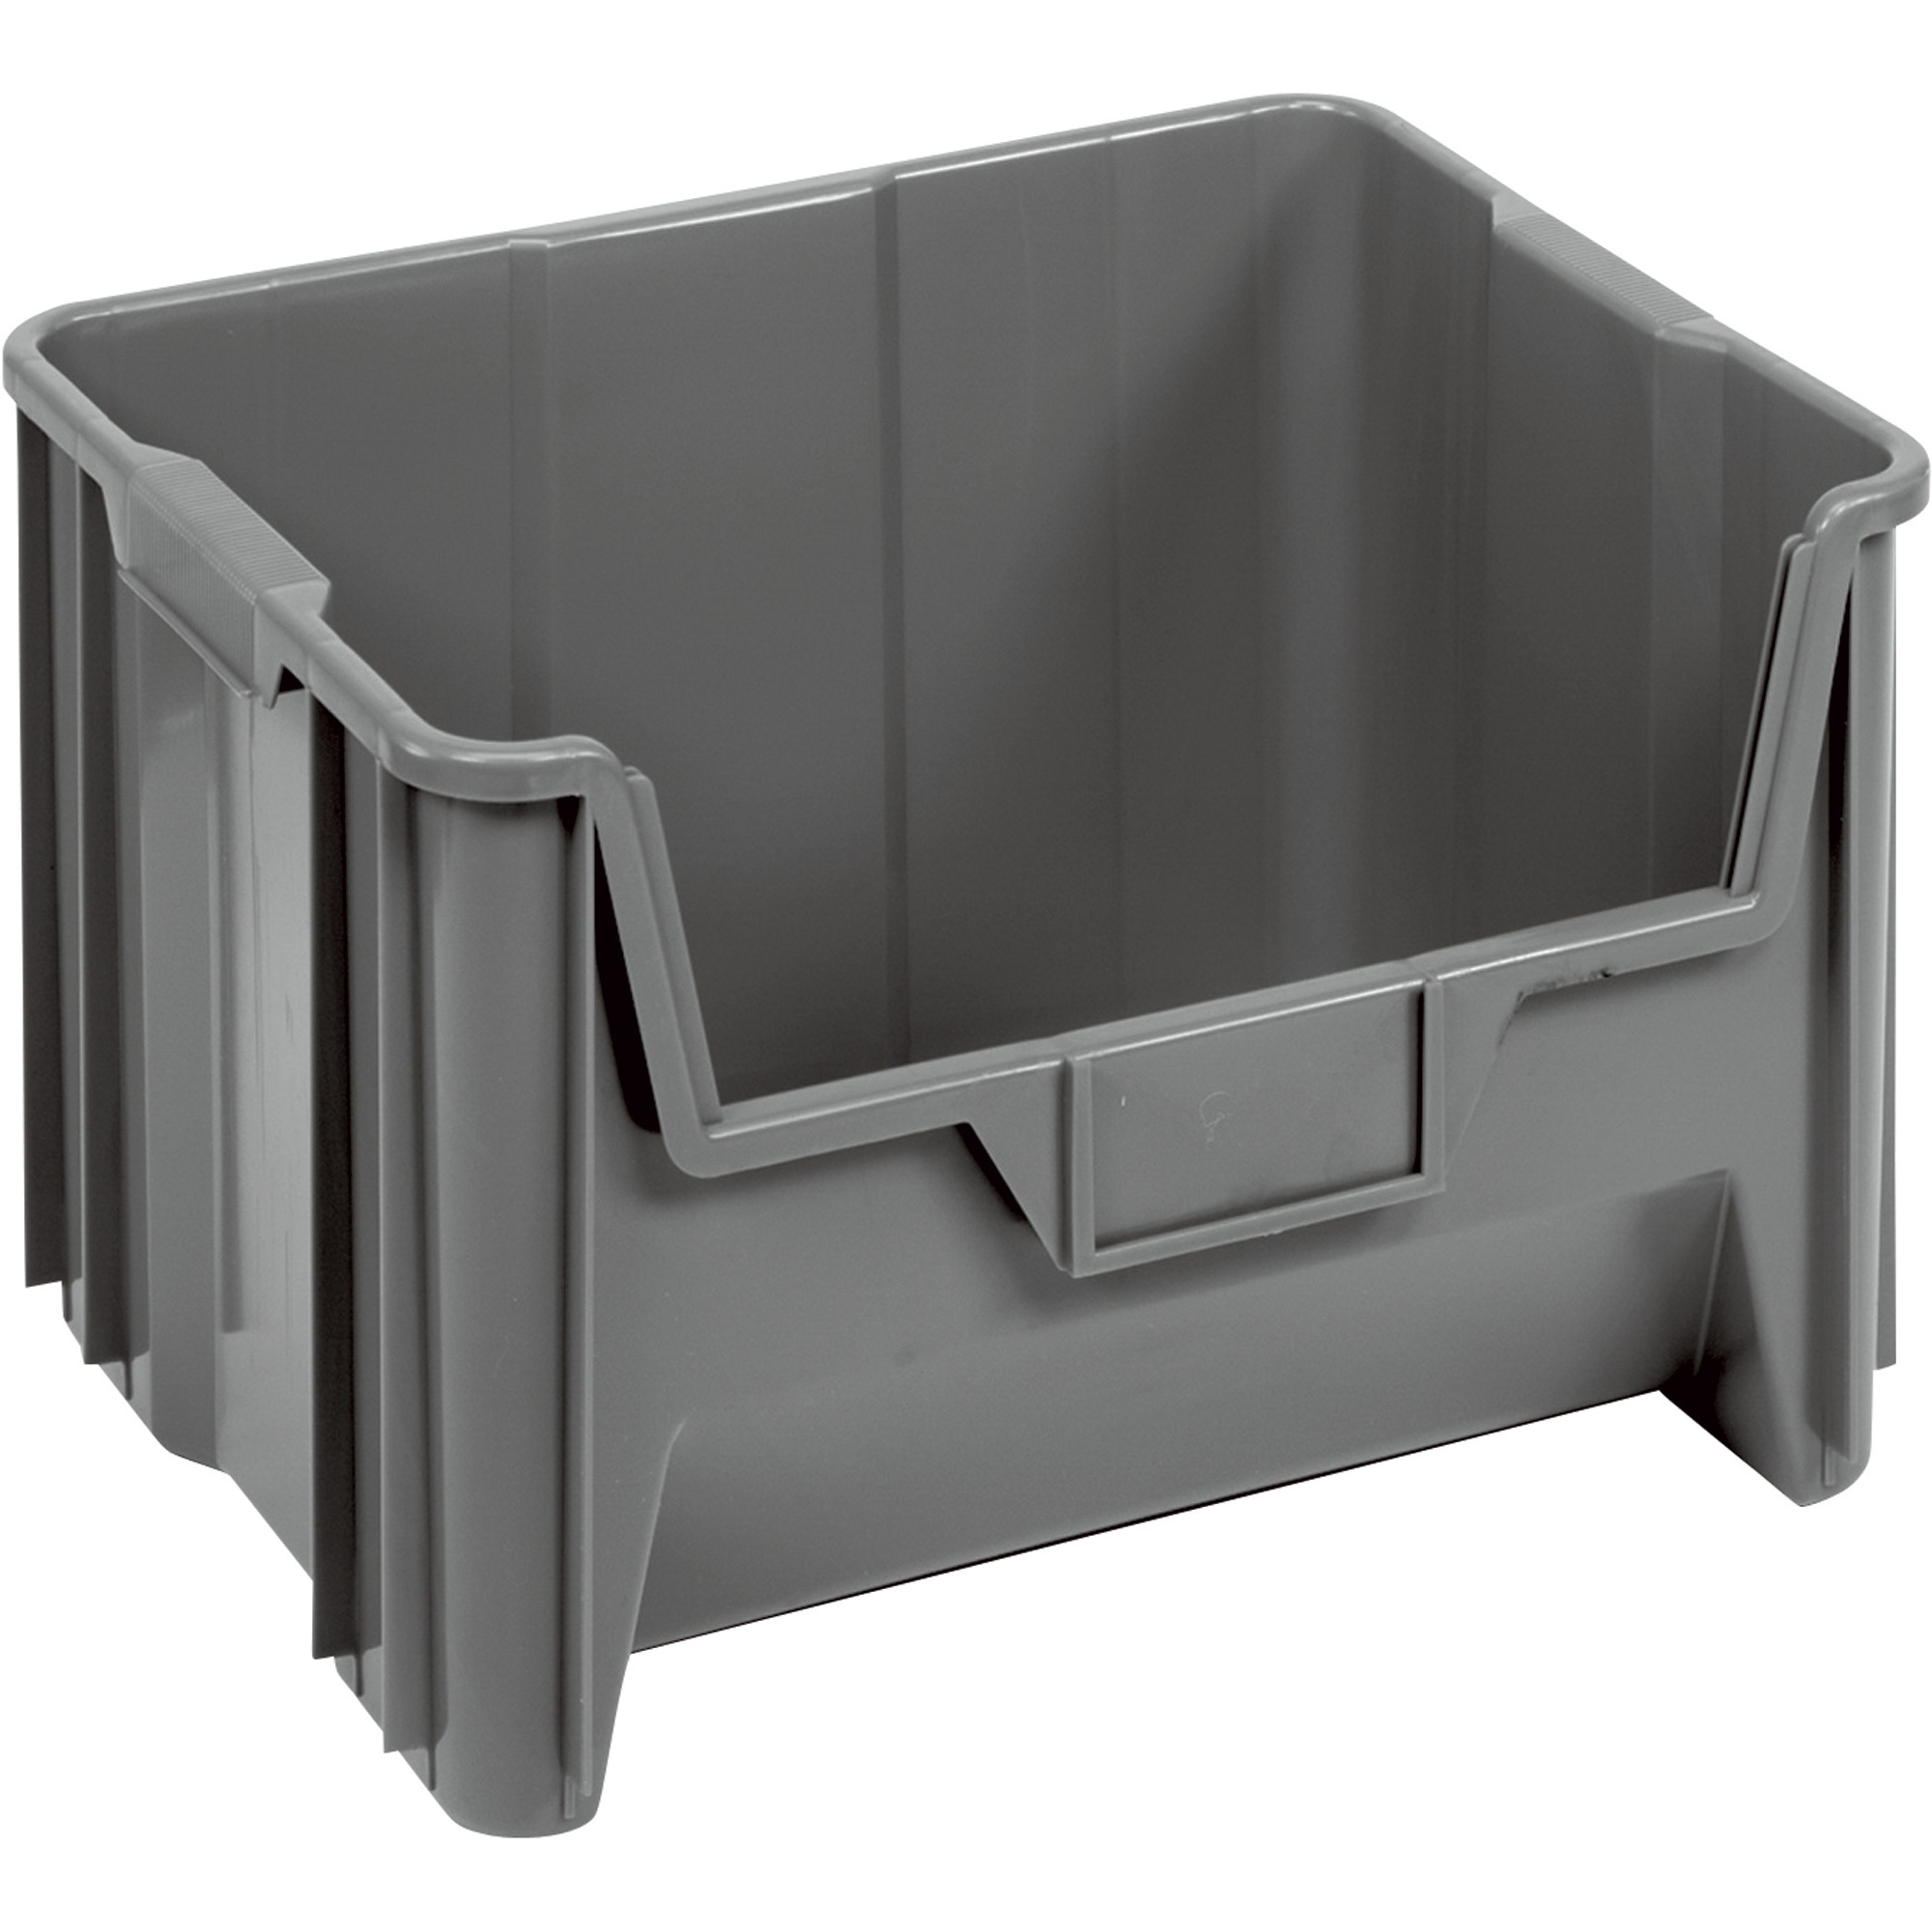 Quantum Storage Giant Stack Container, 3-Pack, 15 1/4Inch L x 19 7/8Inch W x 12 7/16Inch H, Gray, Model QGH700GYCS